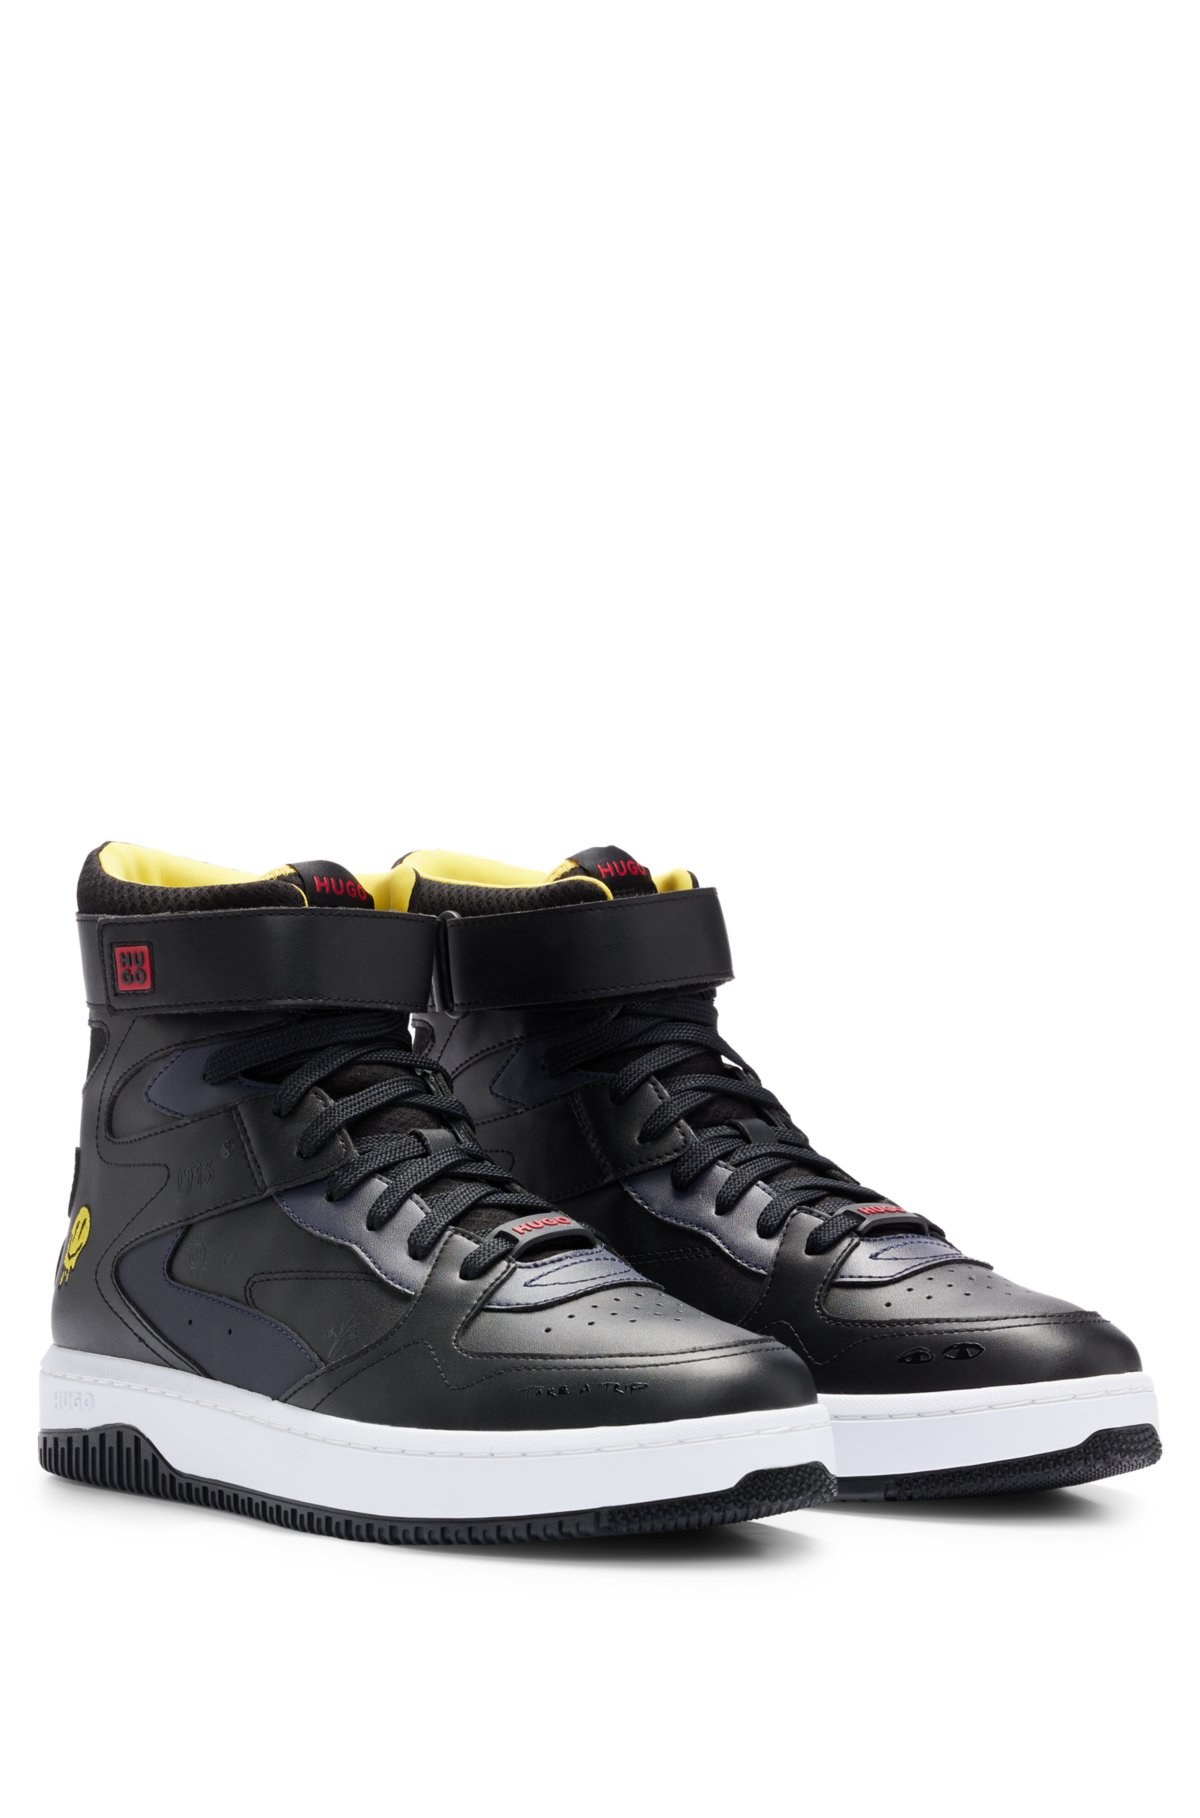 Hugo Men's Basketball-inspired High-Top Trainer Sneakers with Branded Details - Black - Size 6